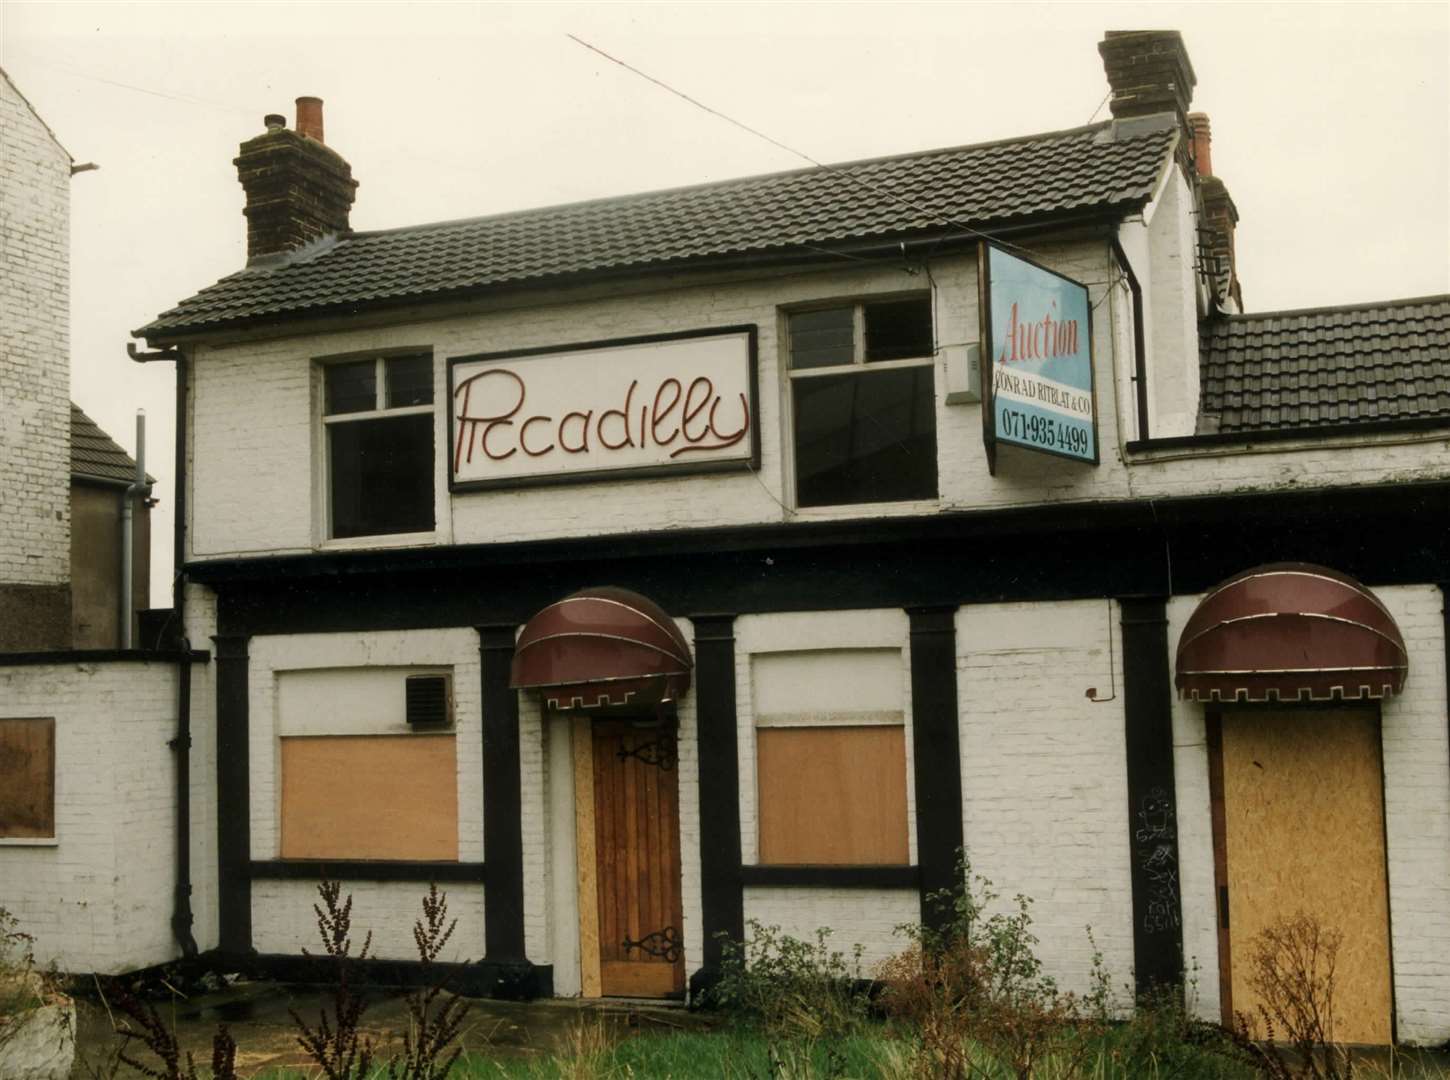 The Piccadilly public house, Chatham Hill, pictured in 1991